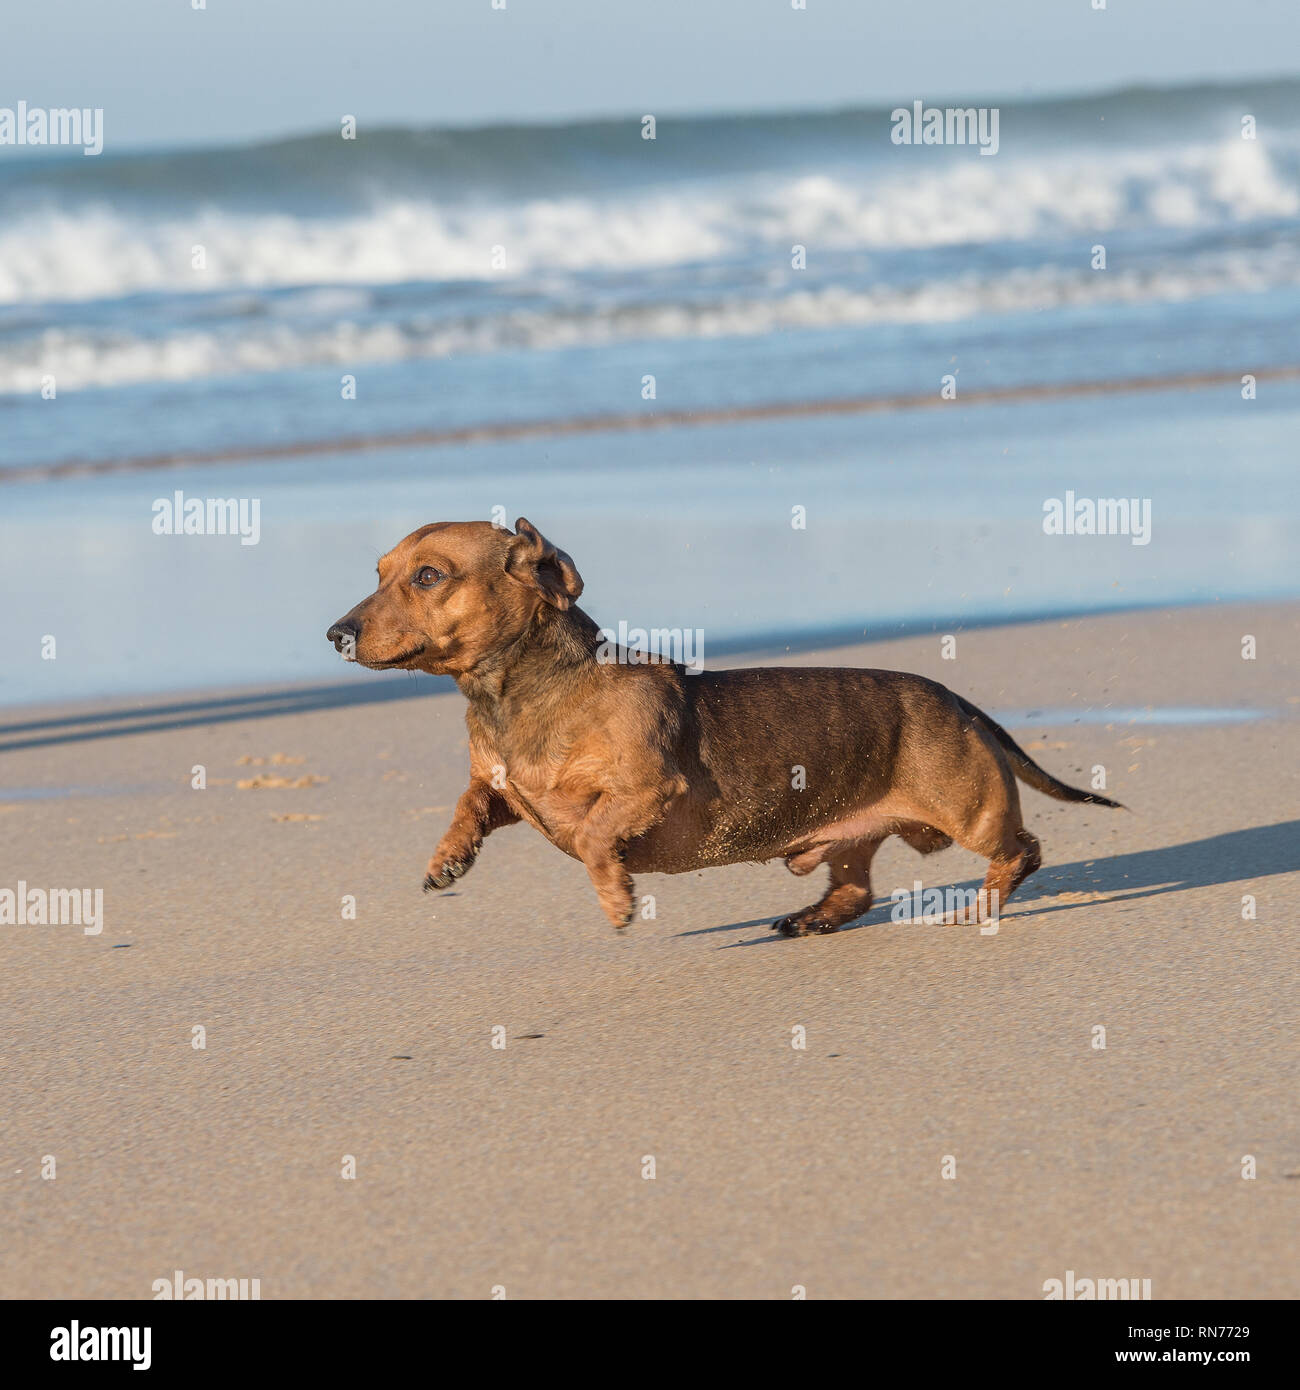 Dachshund dog on beach Banque D'Images